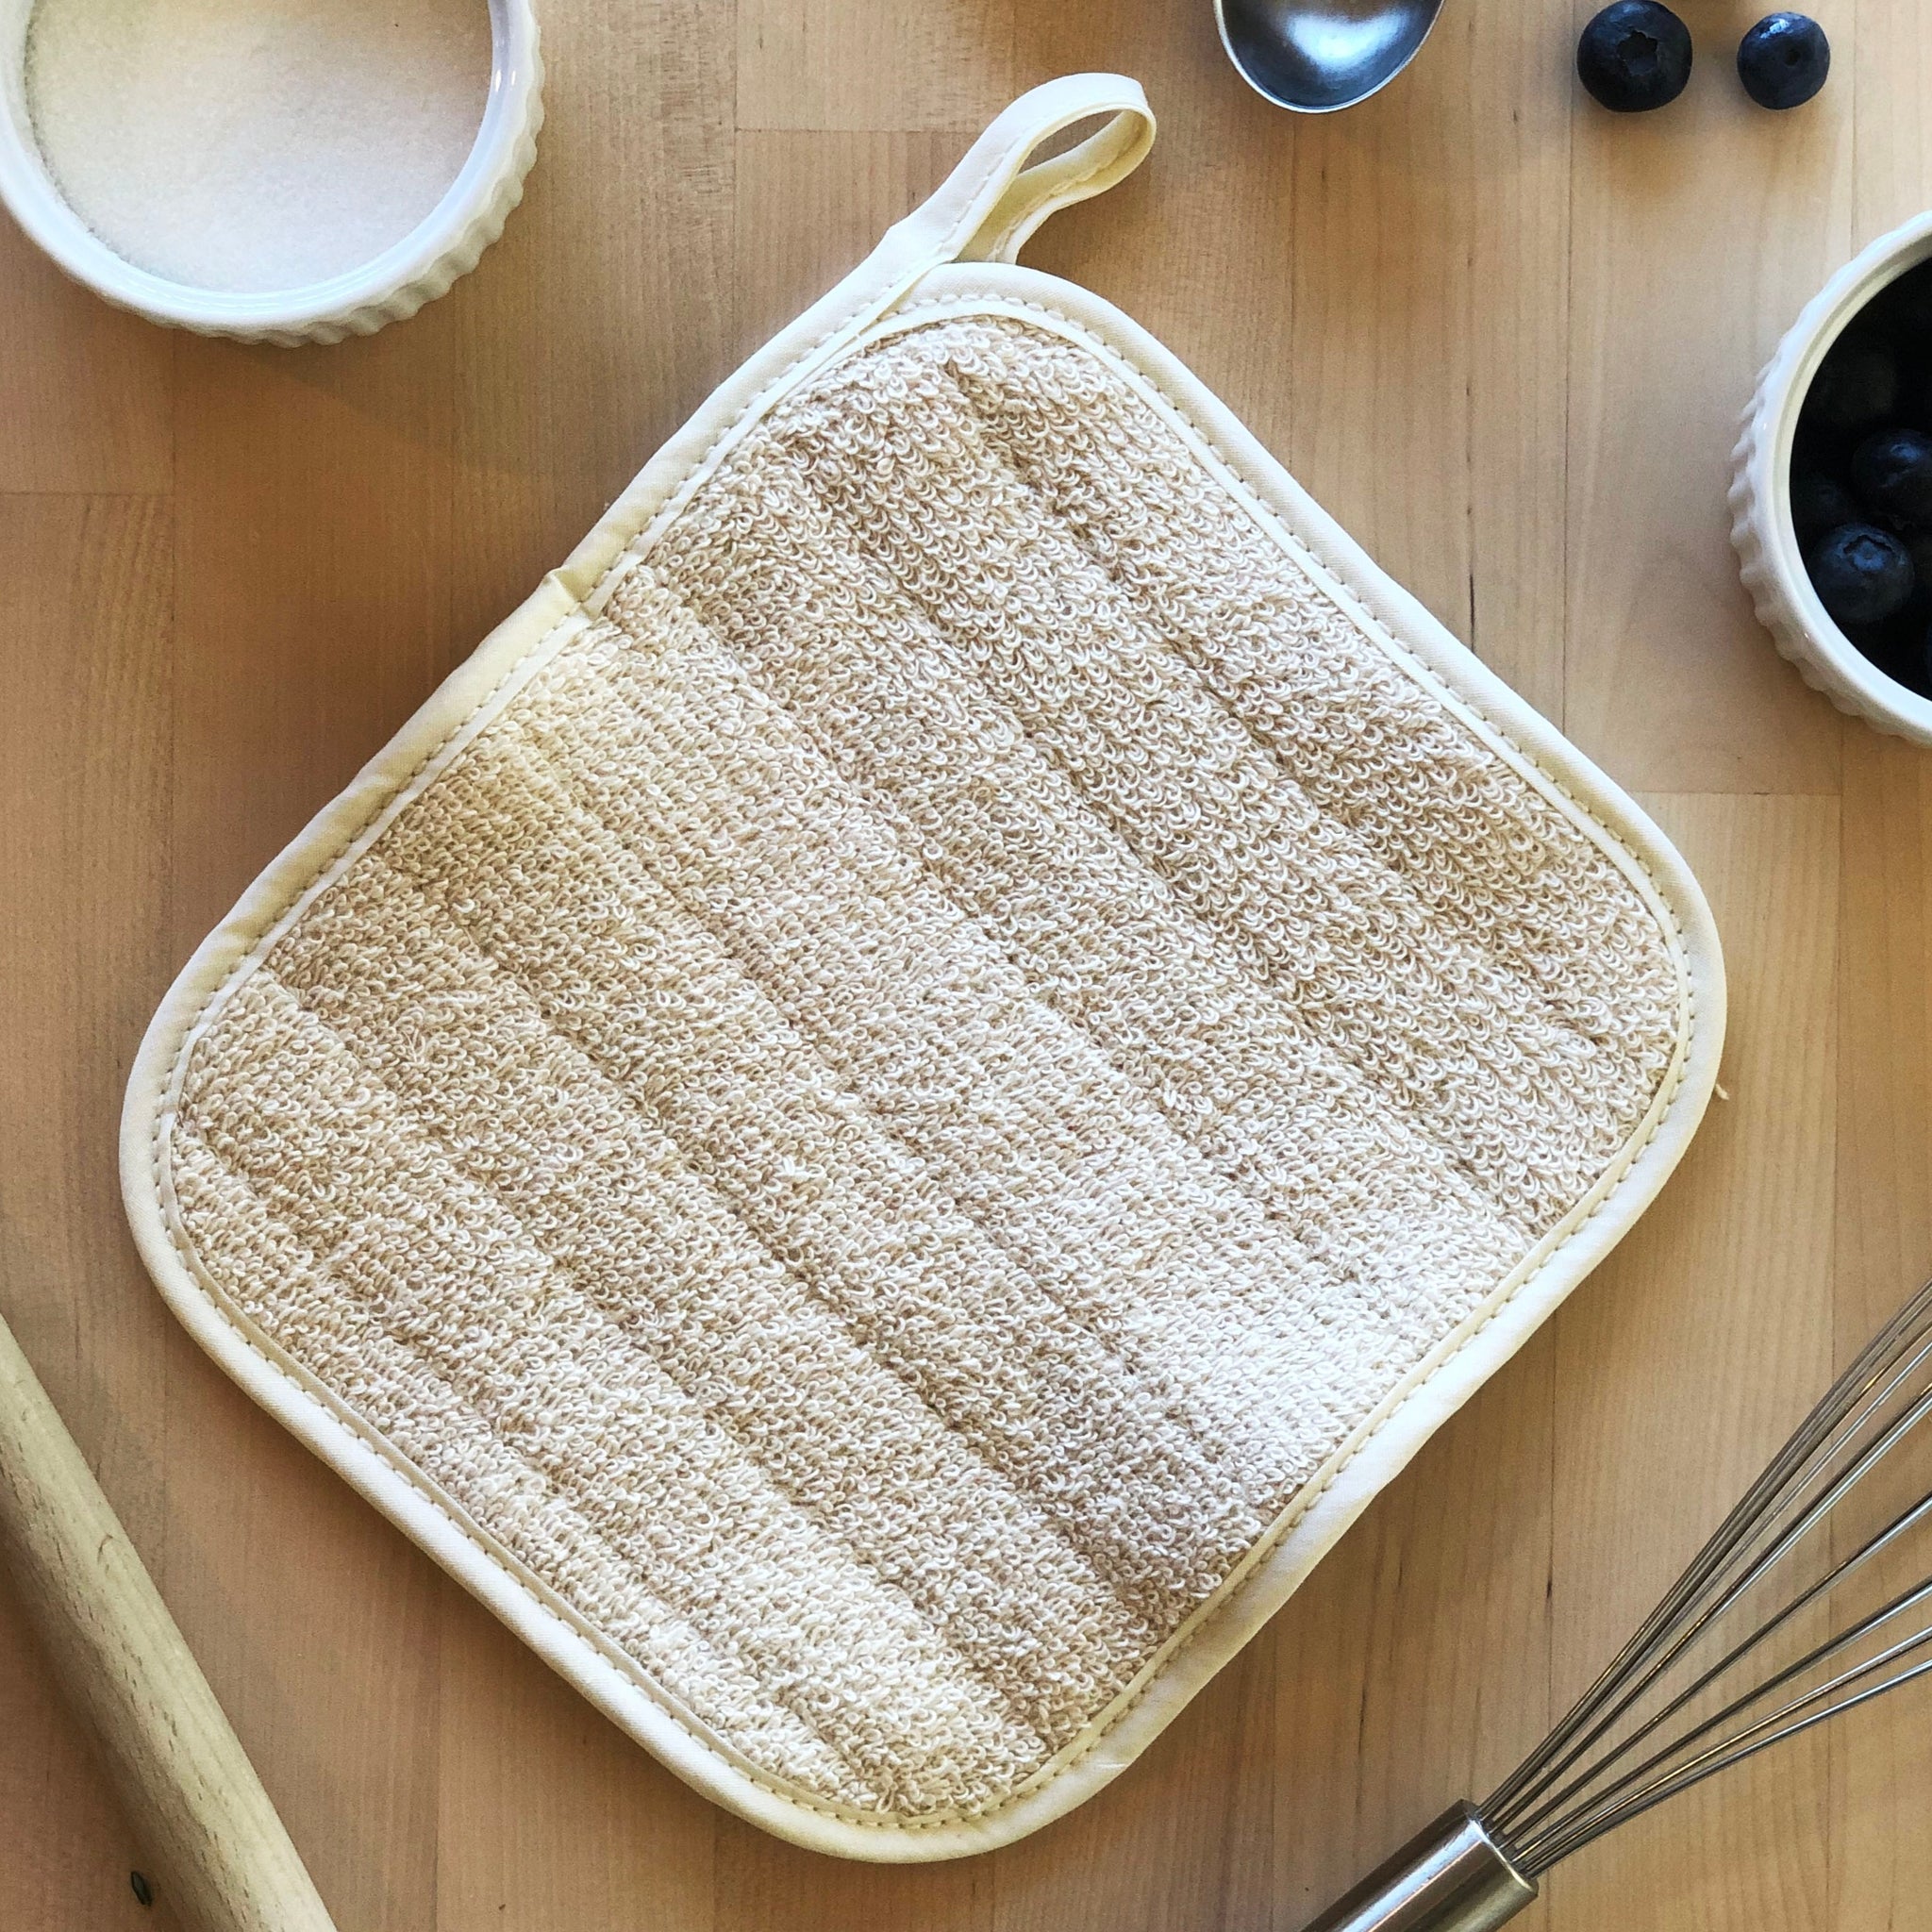 The Best Pot Holders  America's Test Kitchen